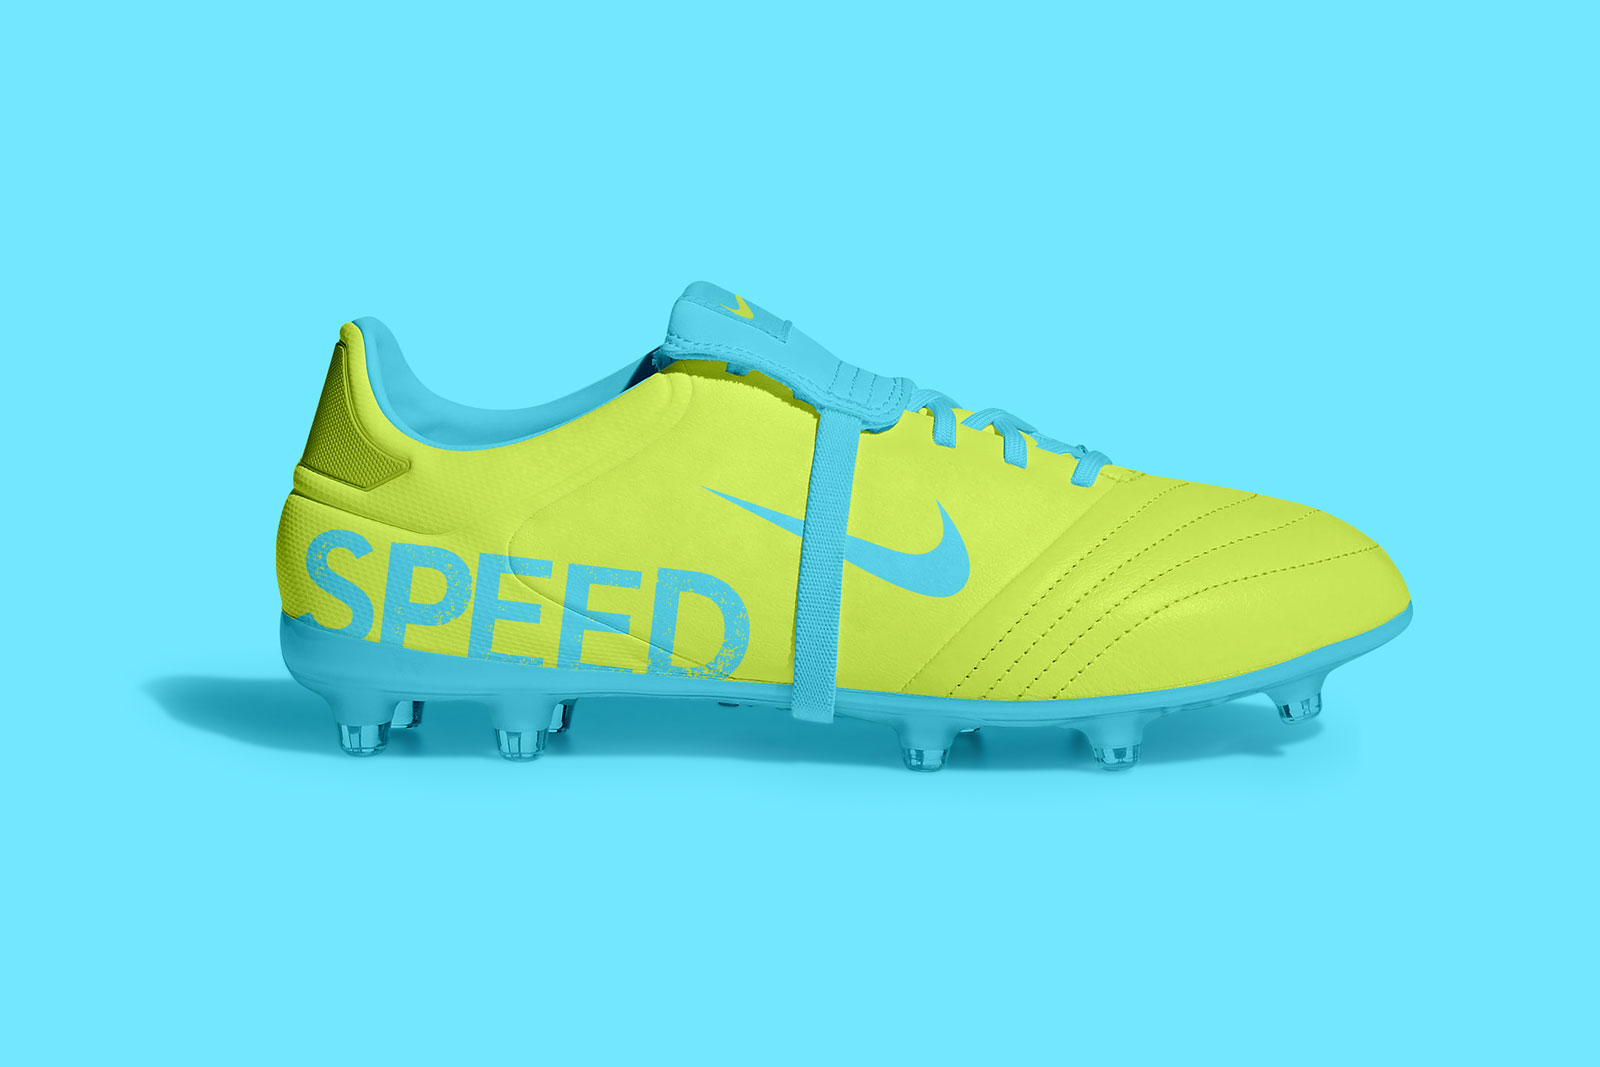 Download Free Soccer Cleat Shoes Mockup PSD | Designbolts